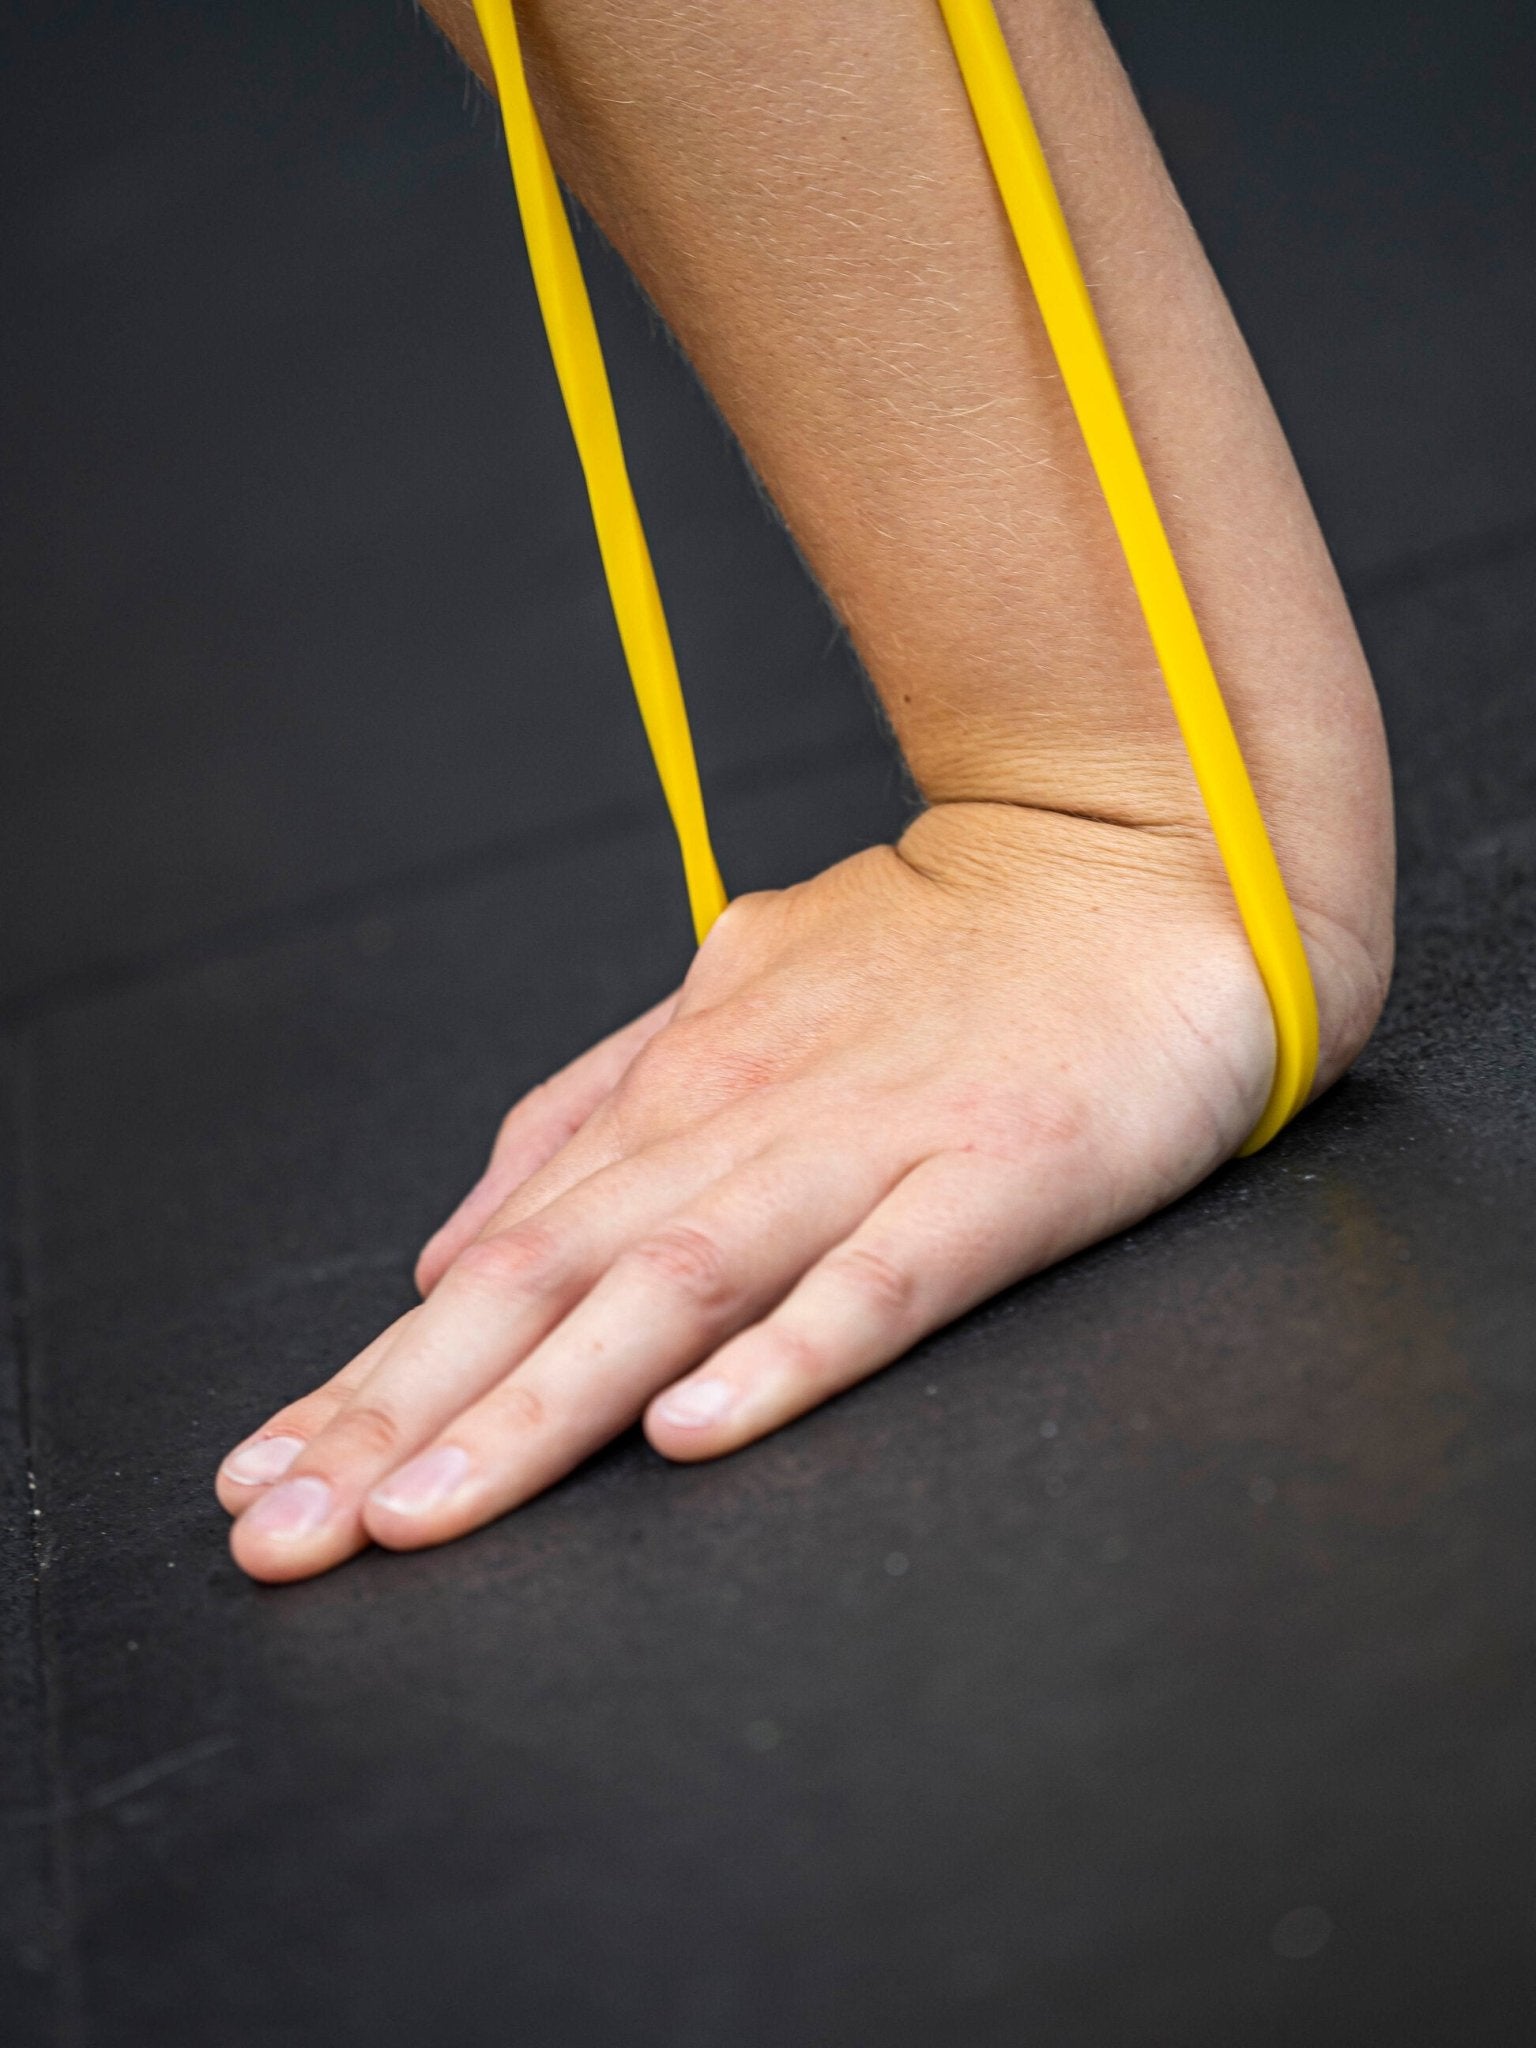 How Resistance Bands Can Help Improve Senior Fitness - POWERBANDS®